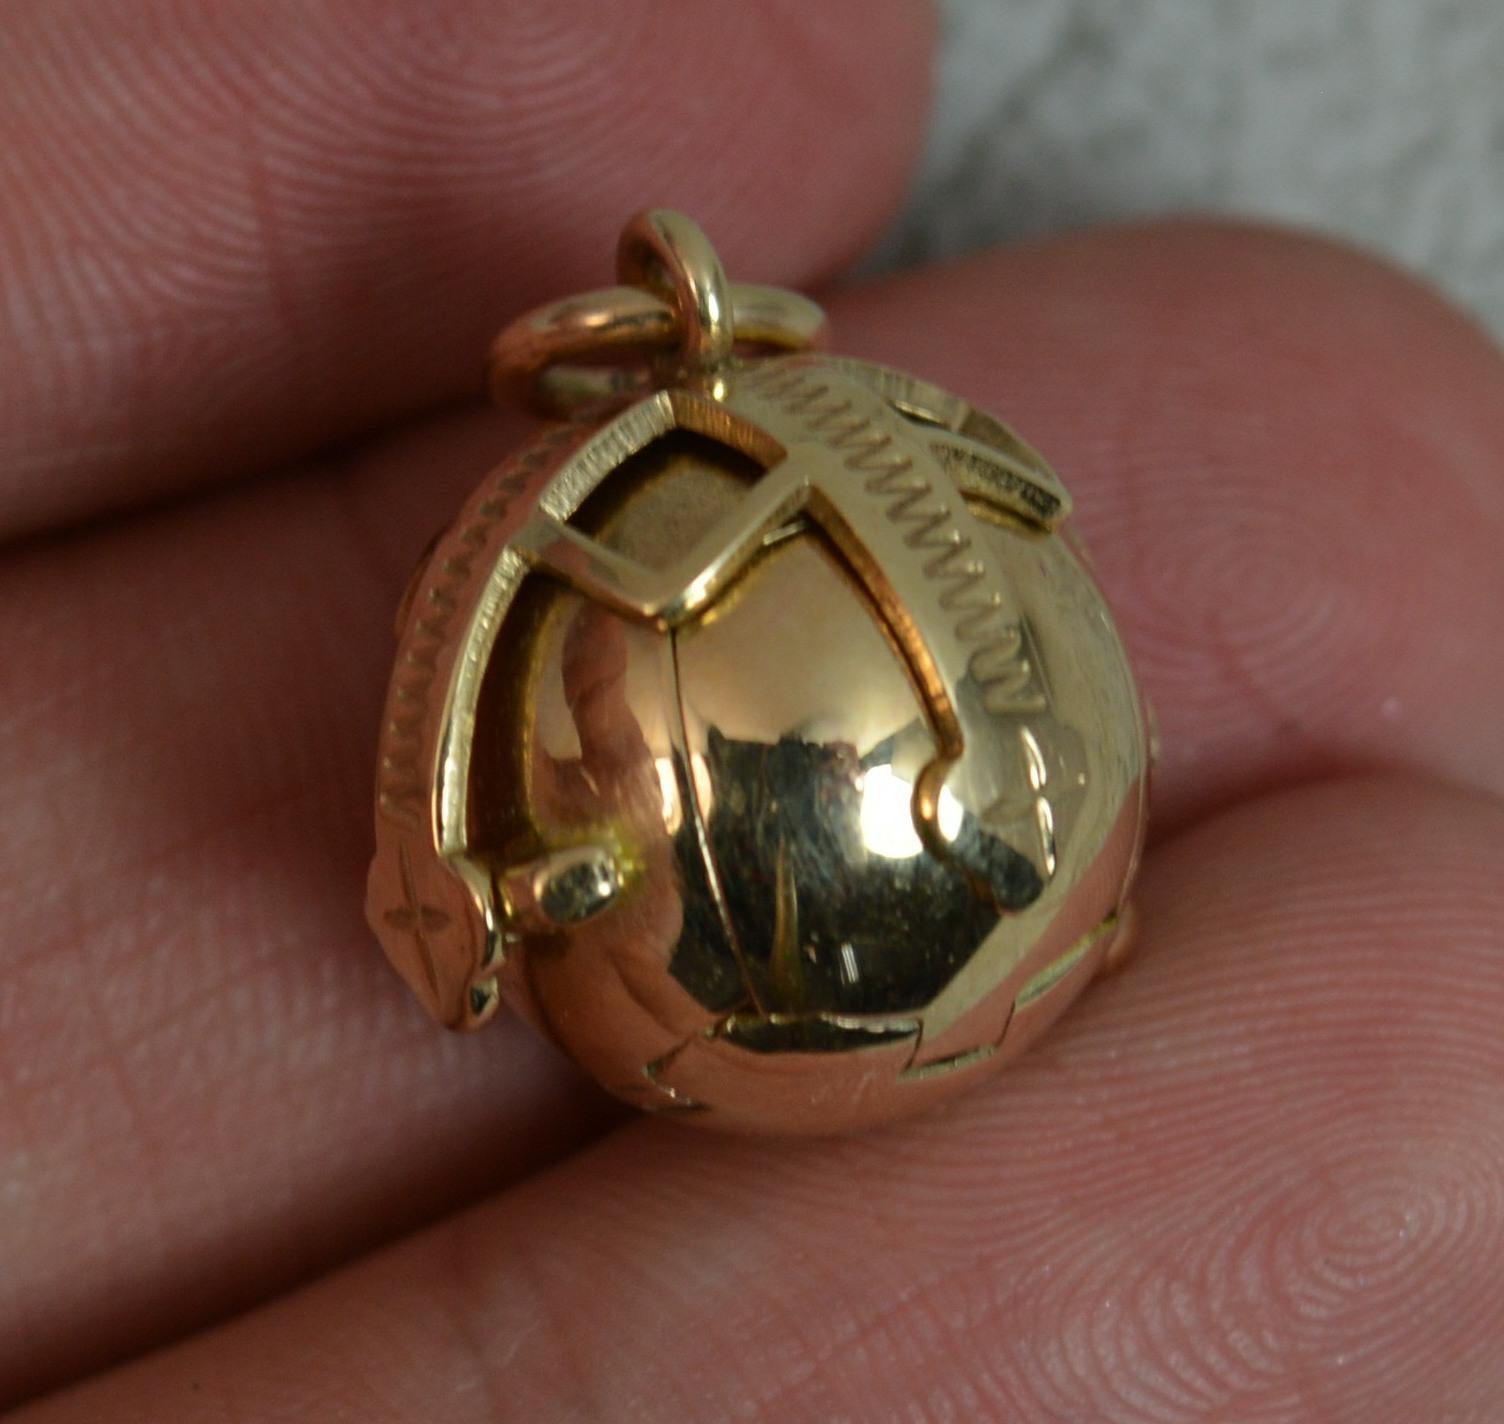 Fine quality solid Masonic / mason's ball. Opens up fully. Stylish piece. 
Well made example in solid 9 carat gold throughout. (the vast majority have a gold on silver ball).

CONDITION ; Good for age. Crisp design. Opens up nicely. Closes up fully.